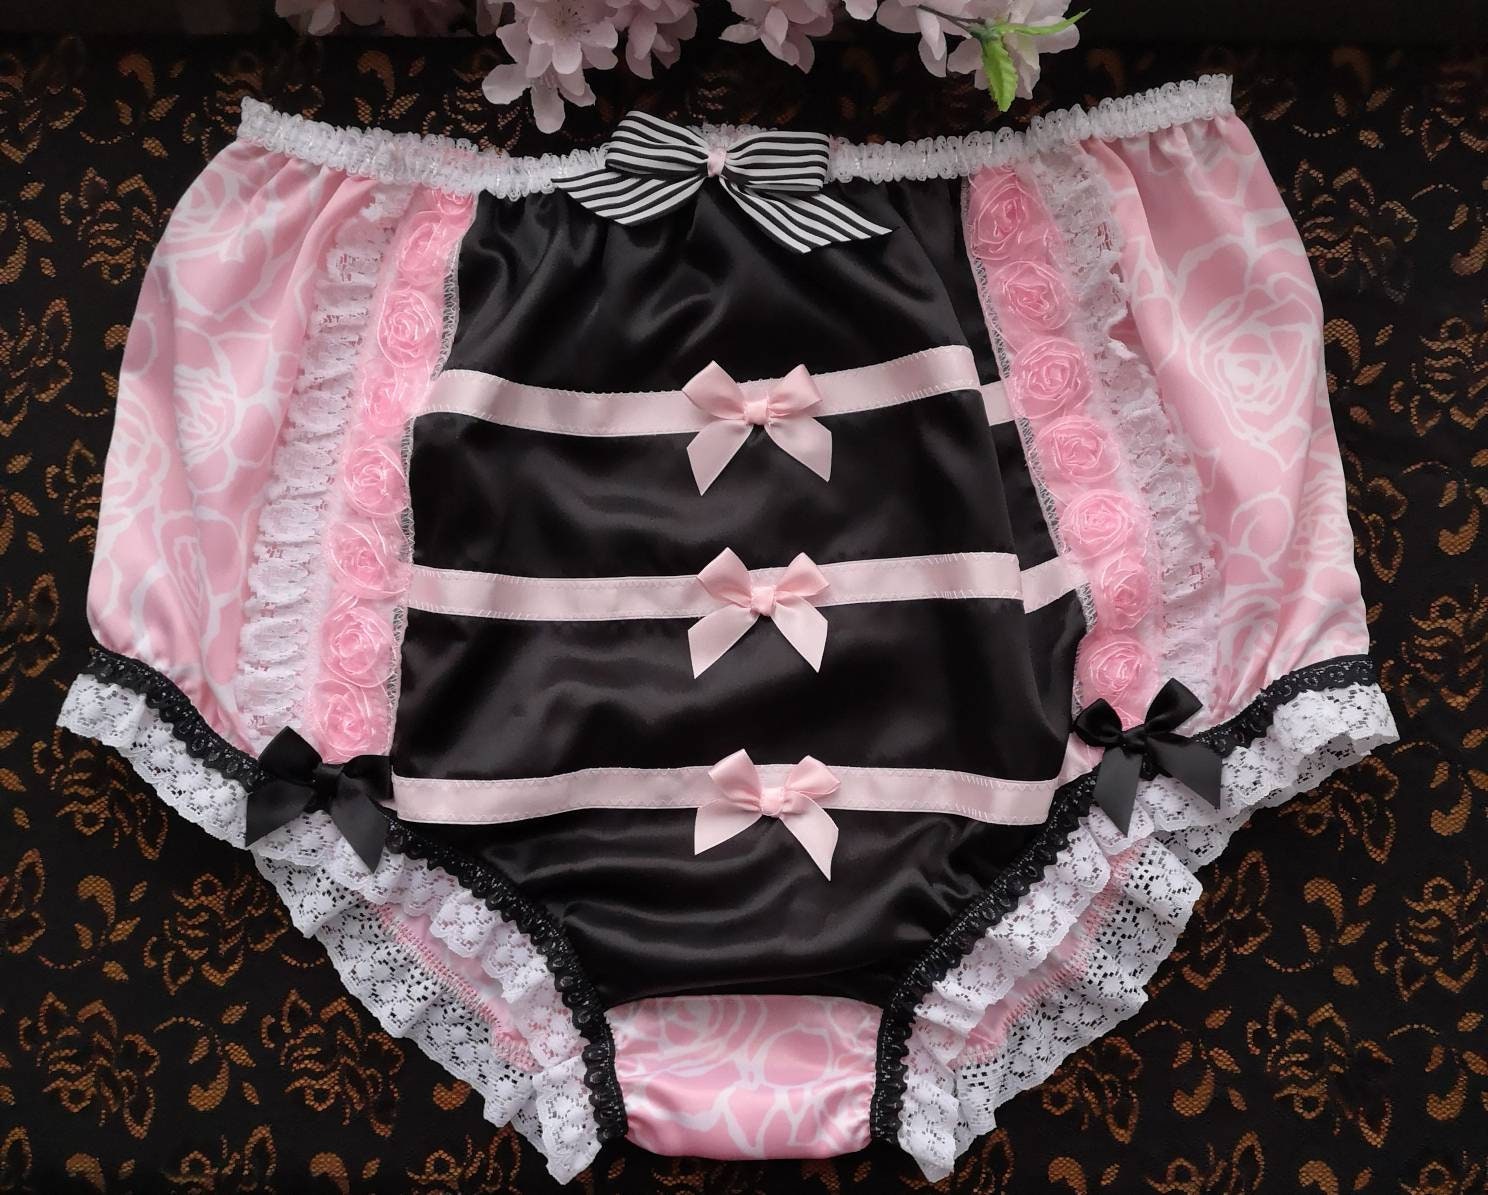 Rose Pink Printed Full Fit Silky Satin Sissy Panties contrast Front Panel.  Made to Order. Medium up to Extra Extra Large. -  Canada